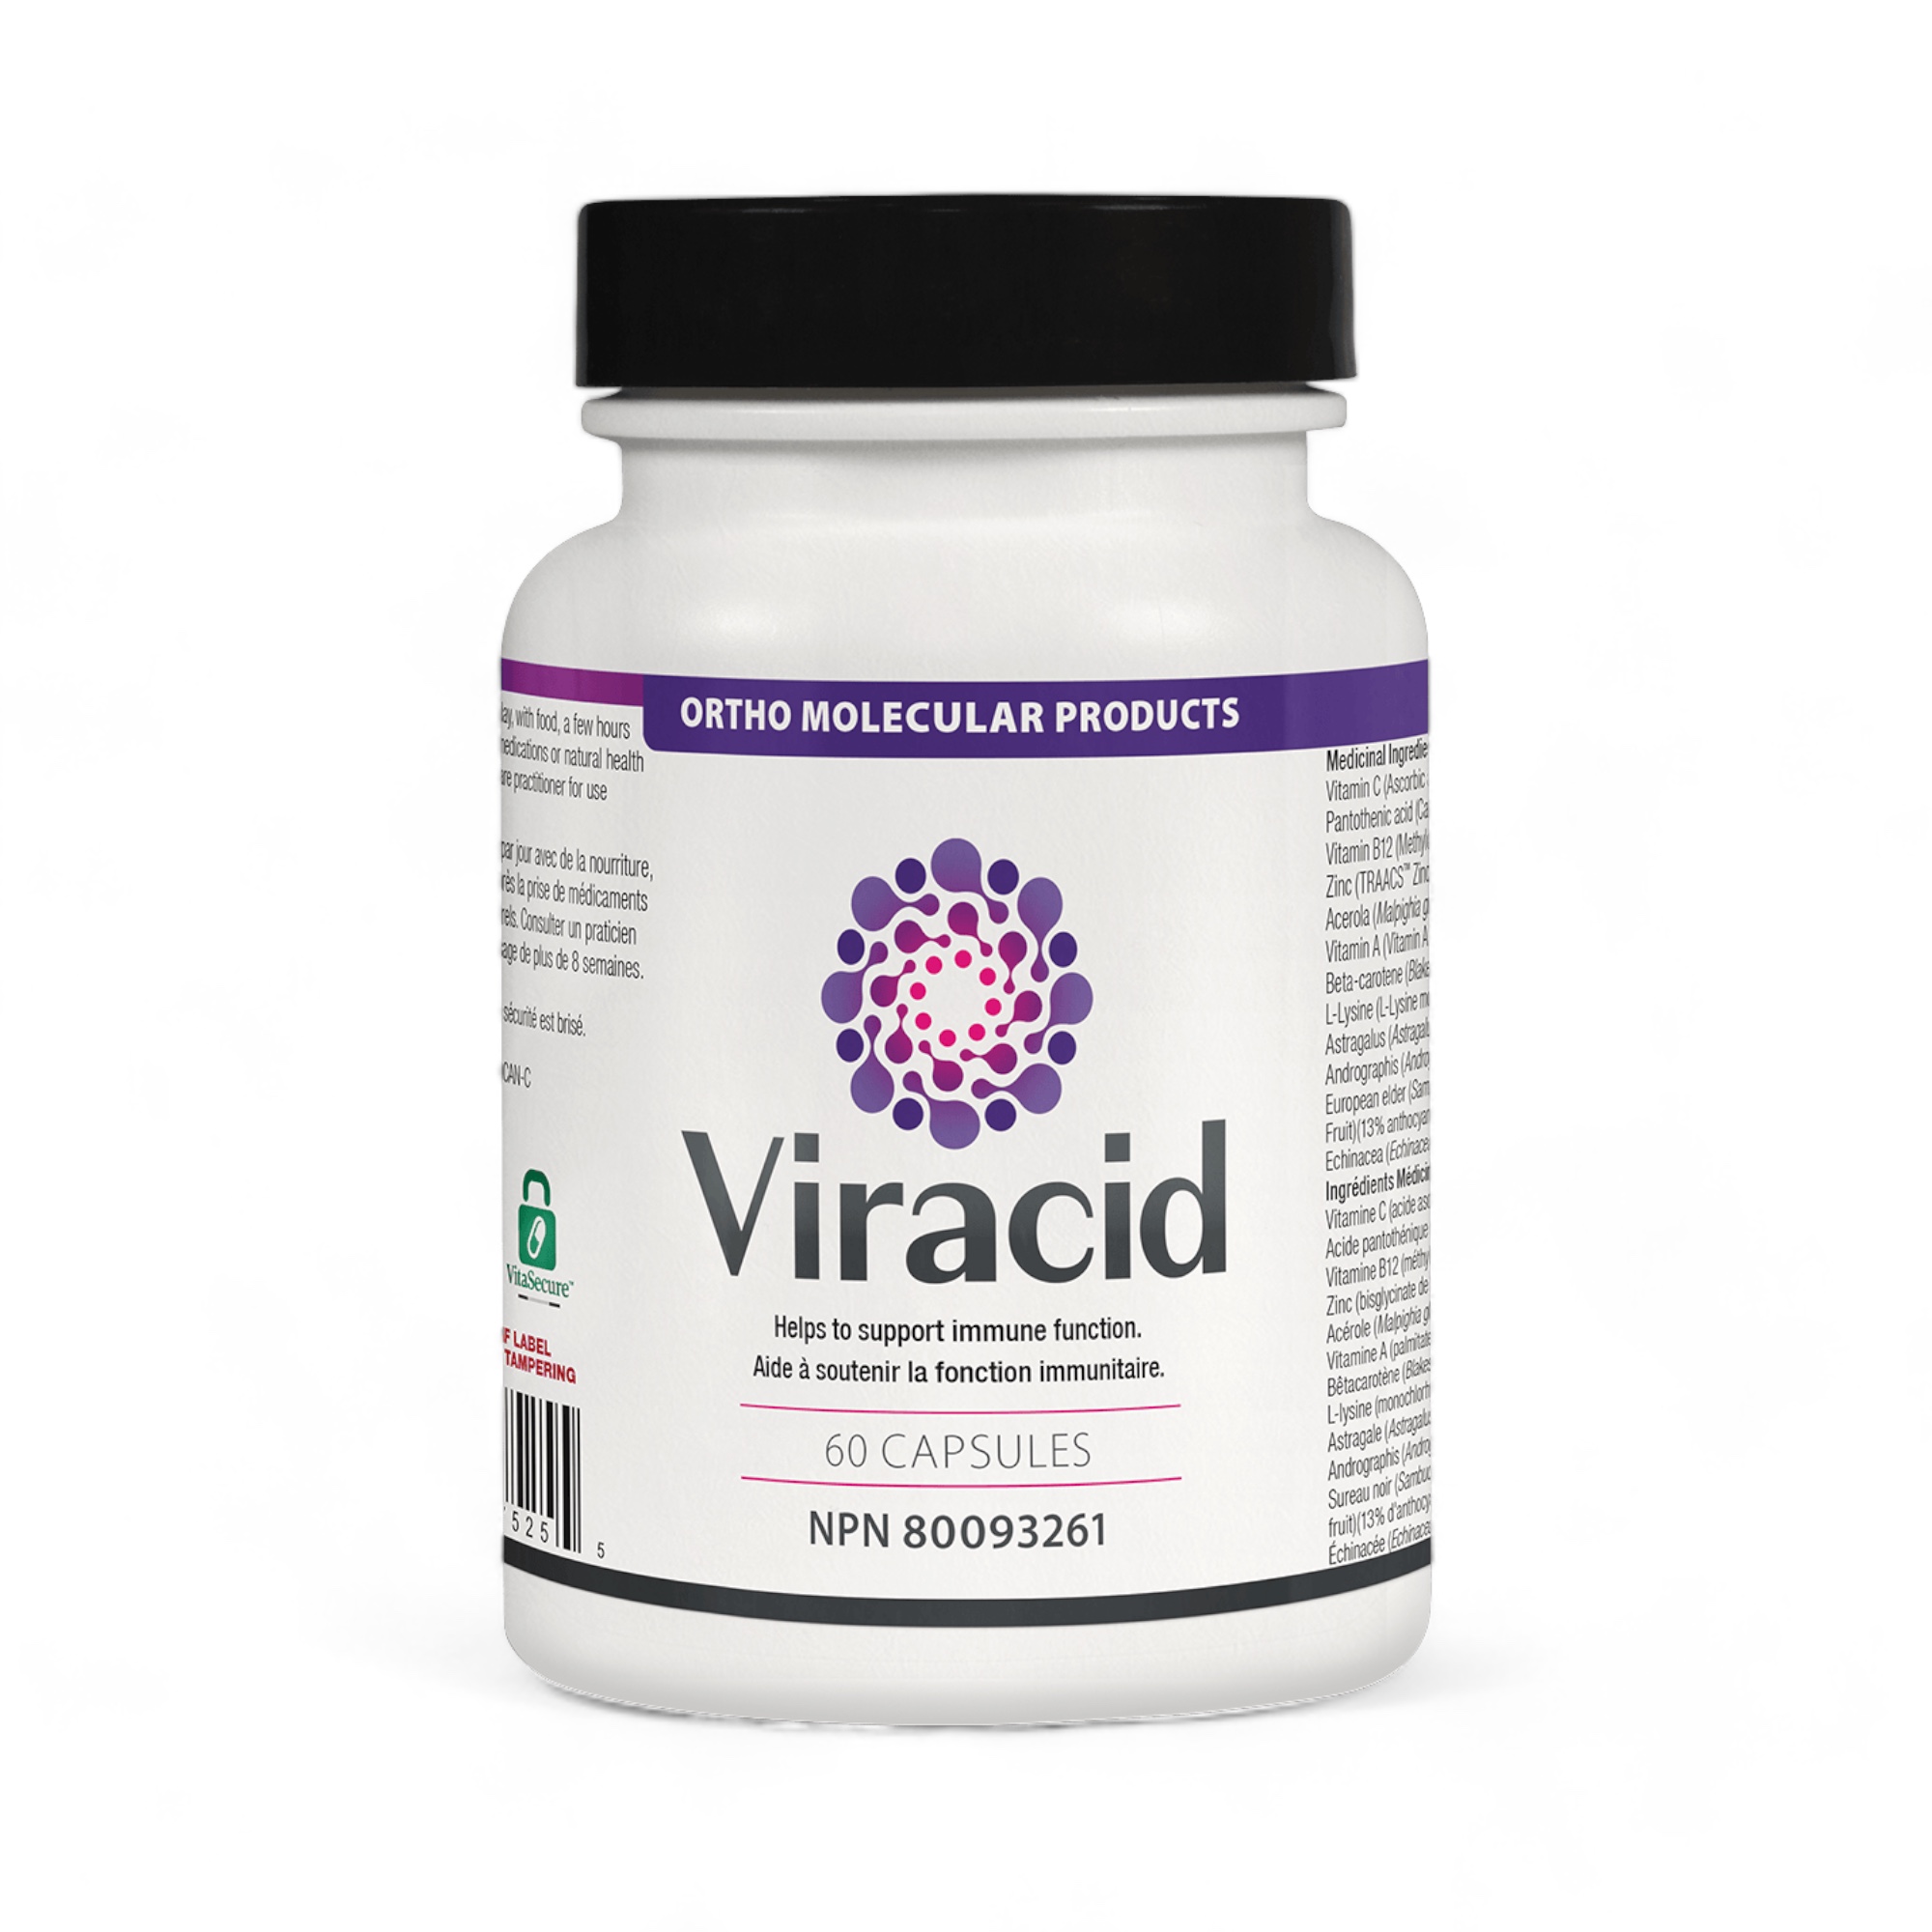 Viracid 60 capsules Ortho Molecular Products